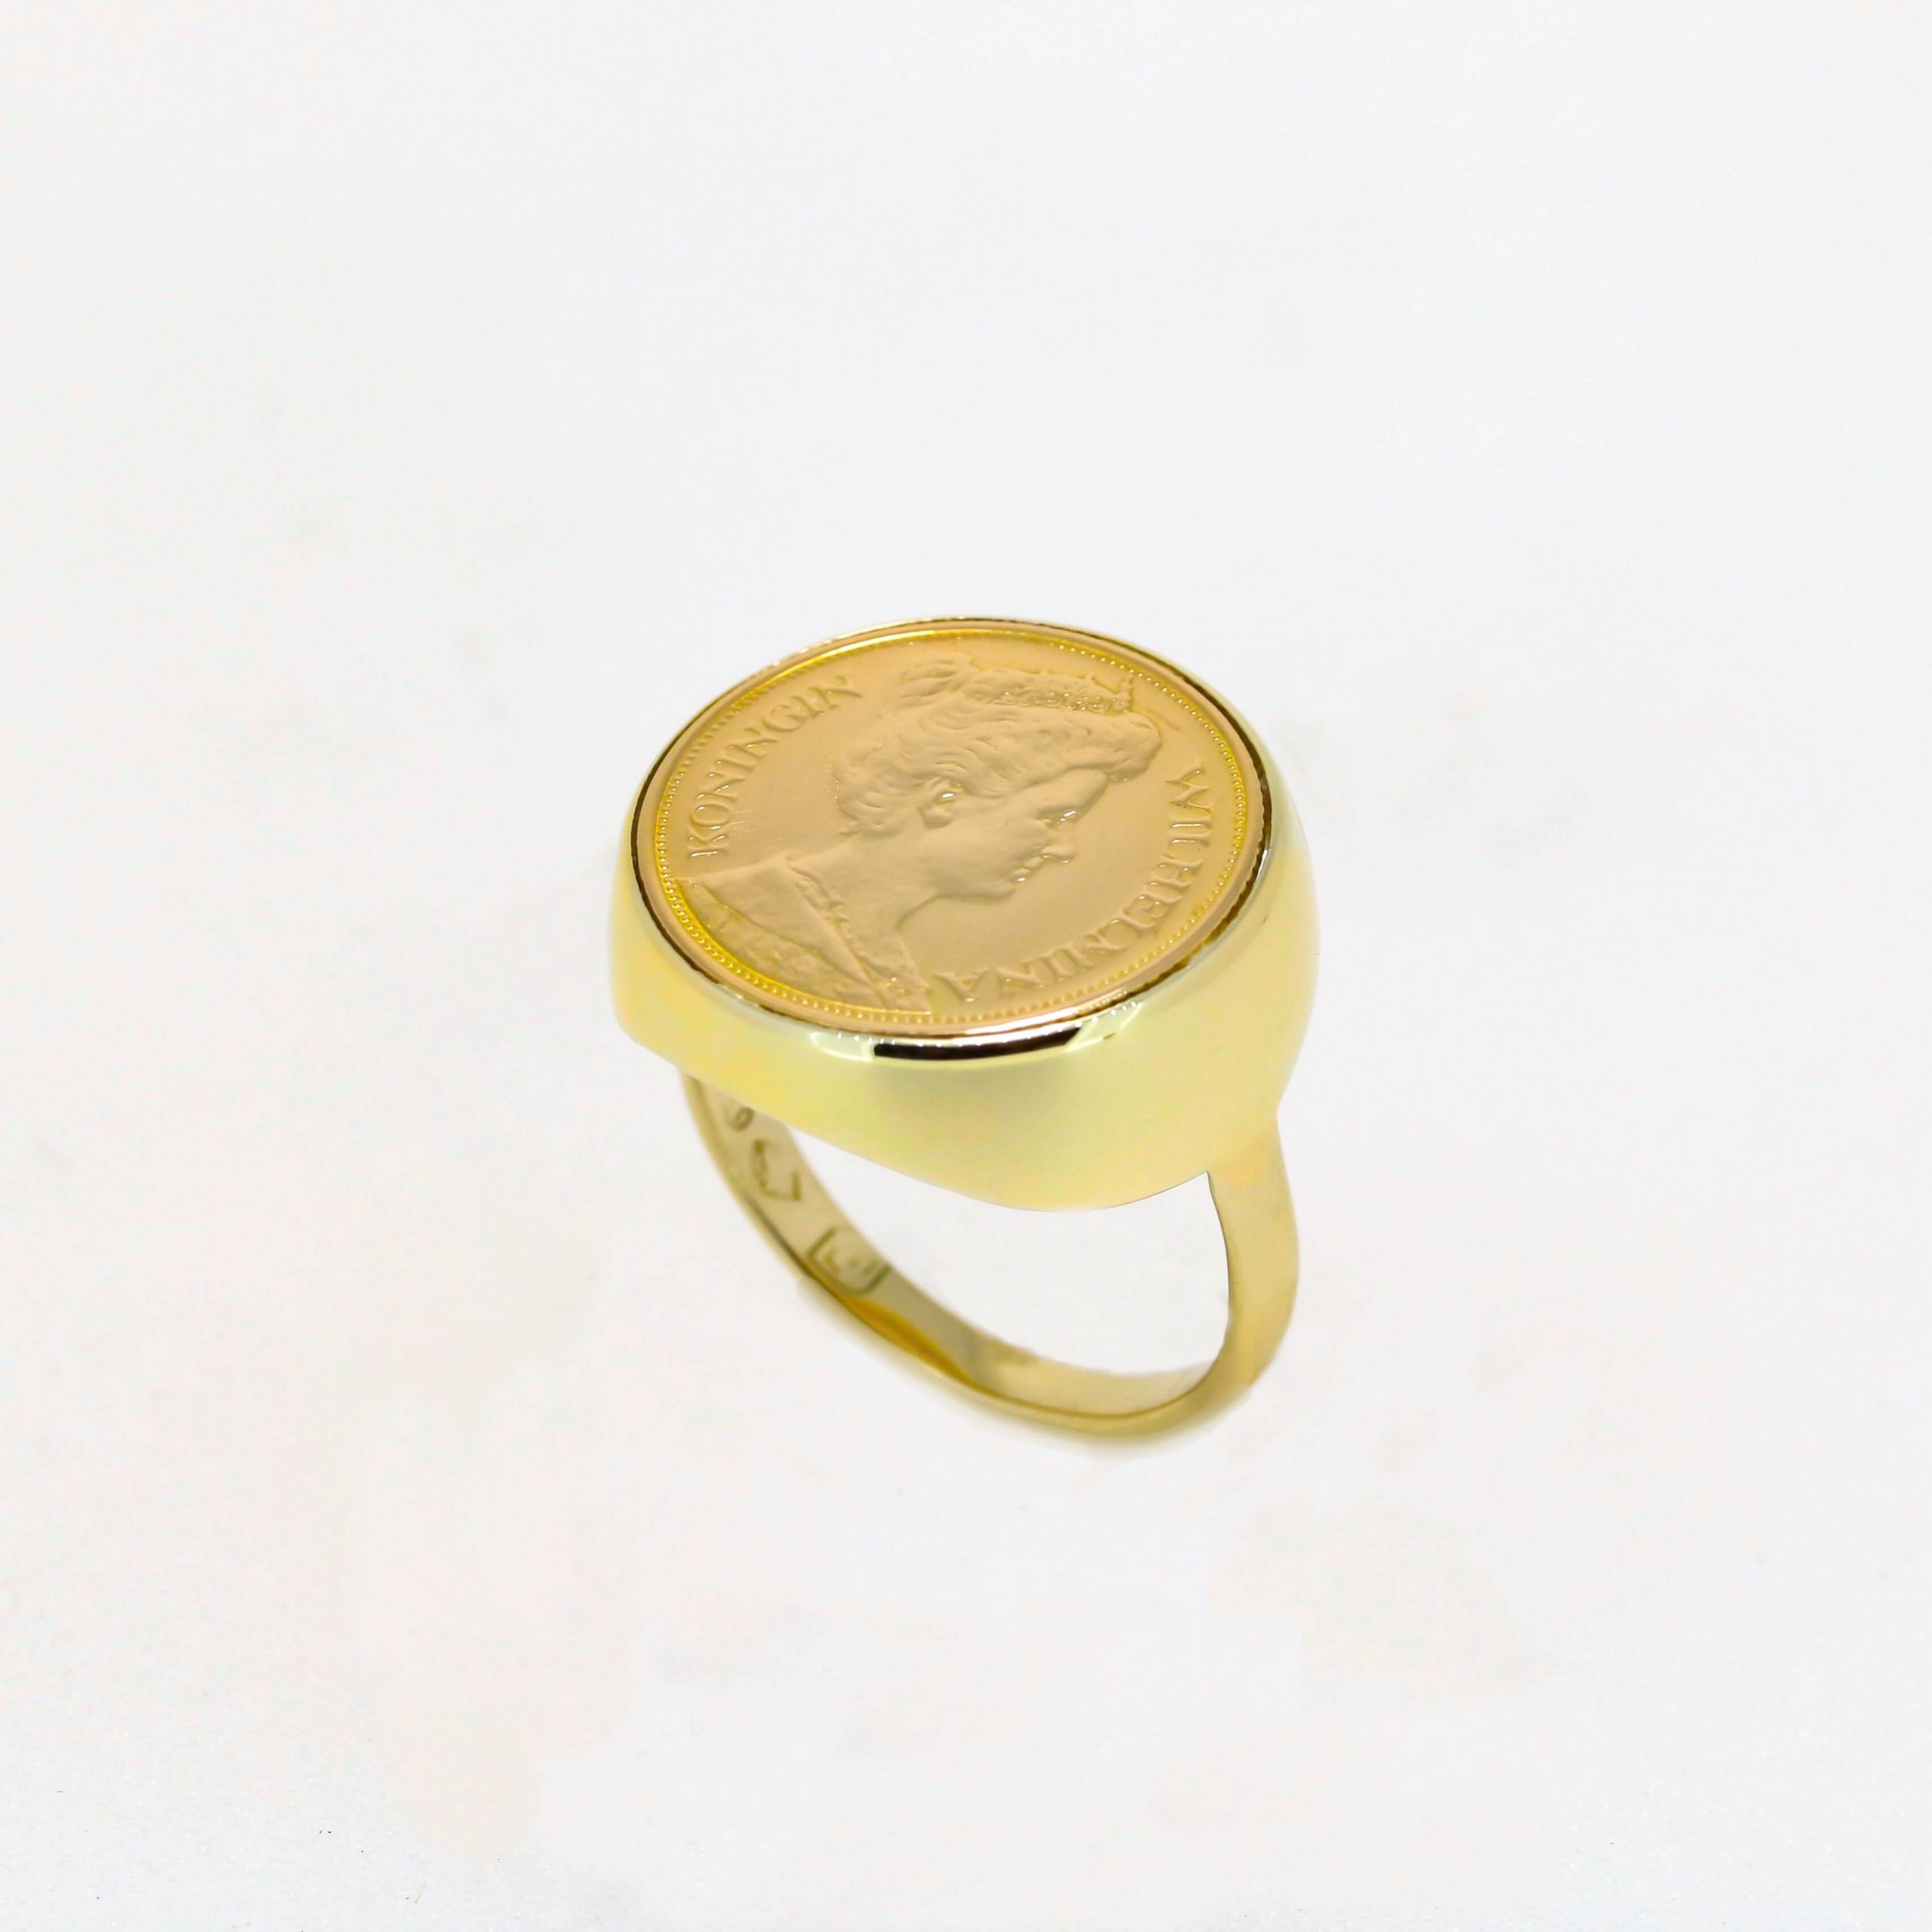 You are currently viewing Netherlands Coin Ring